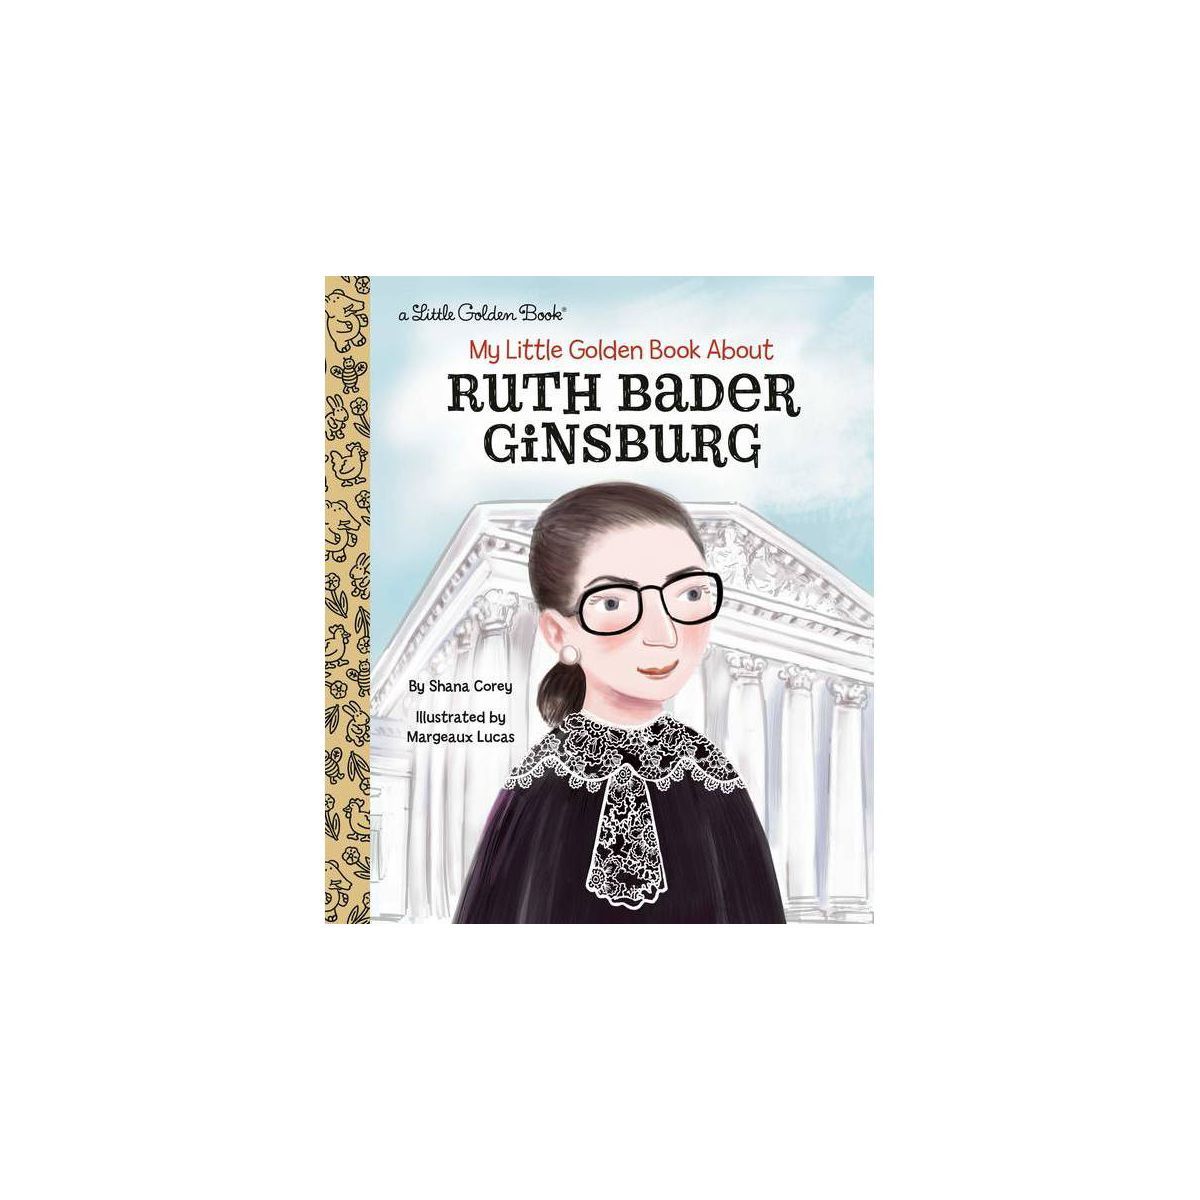 My Little Golden Book about Ruth Bader Ginsburg - by Shana Corey (Hardcover) | Target